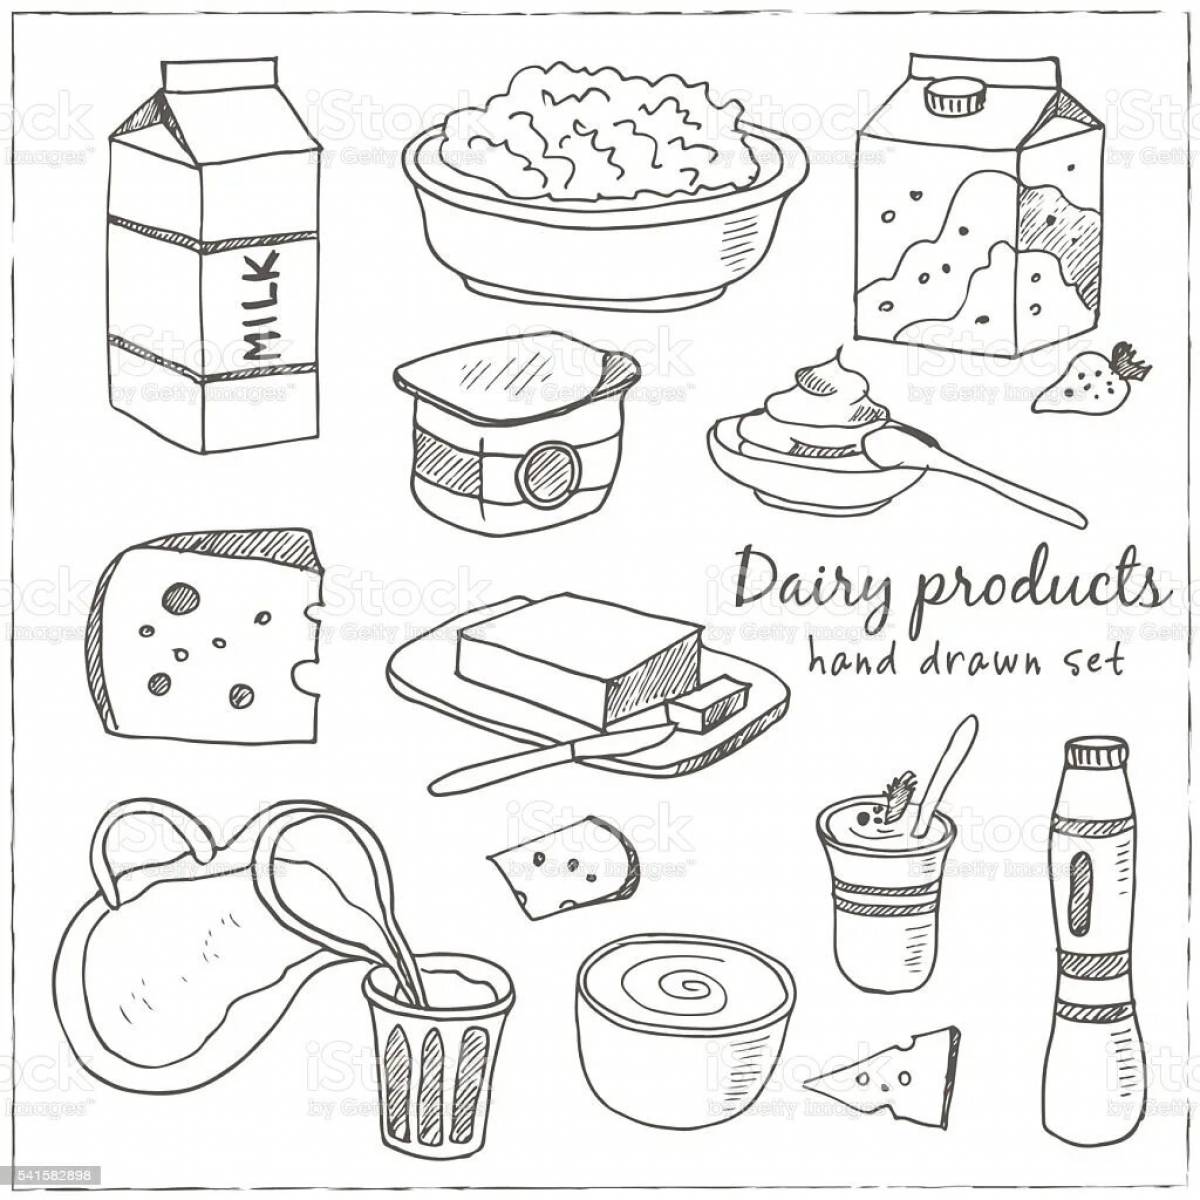 Dairy products for children #17